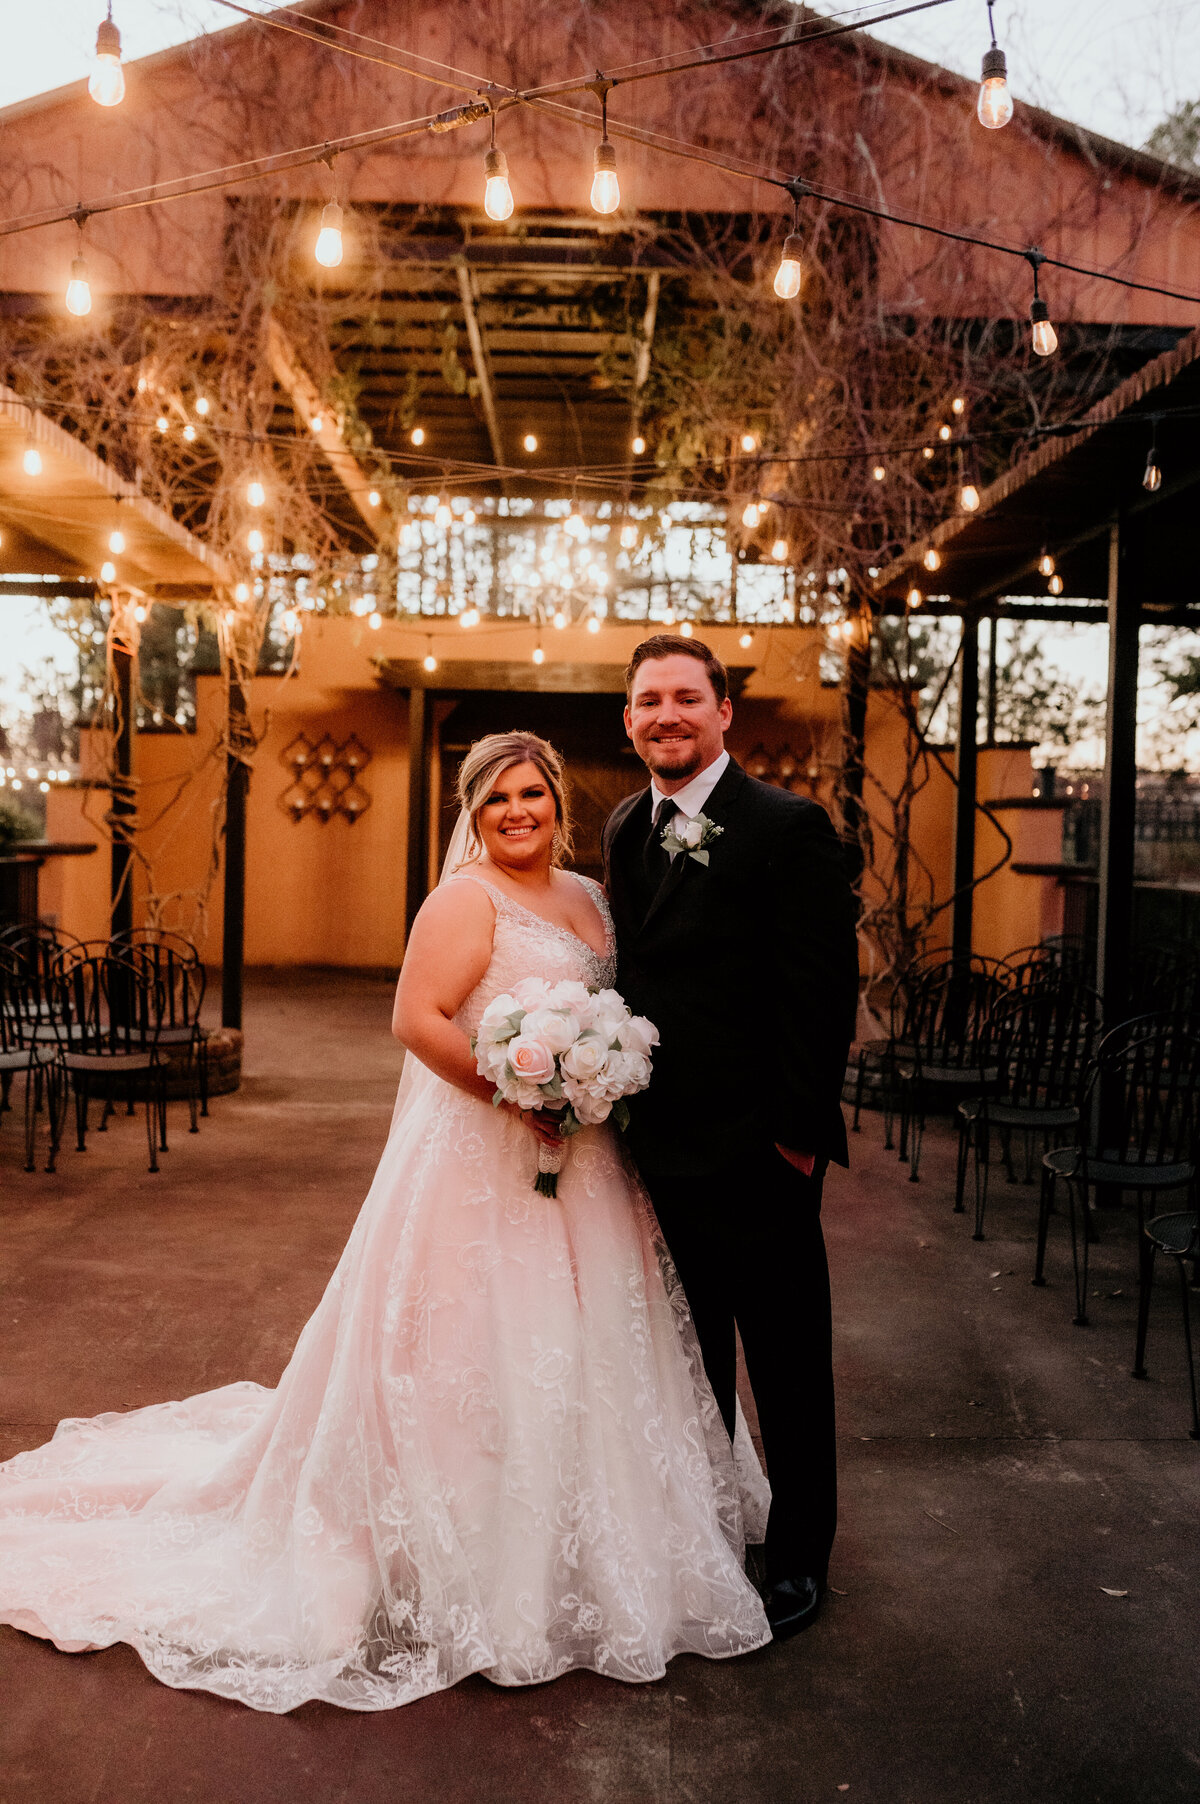 outdoor wedding reception space with string lights and stone walls with bride and groom standing together and smiling at the camera